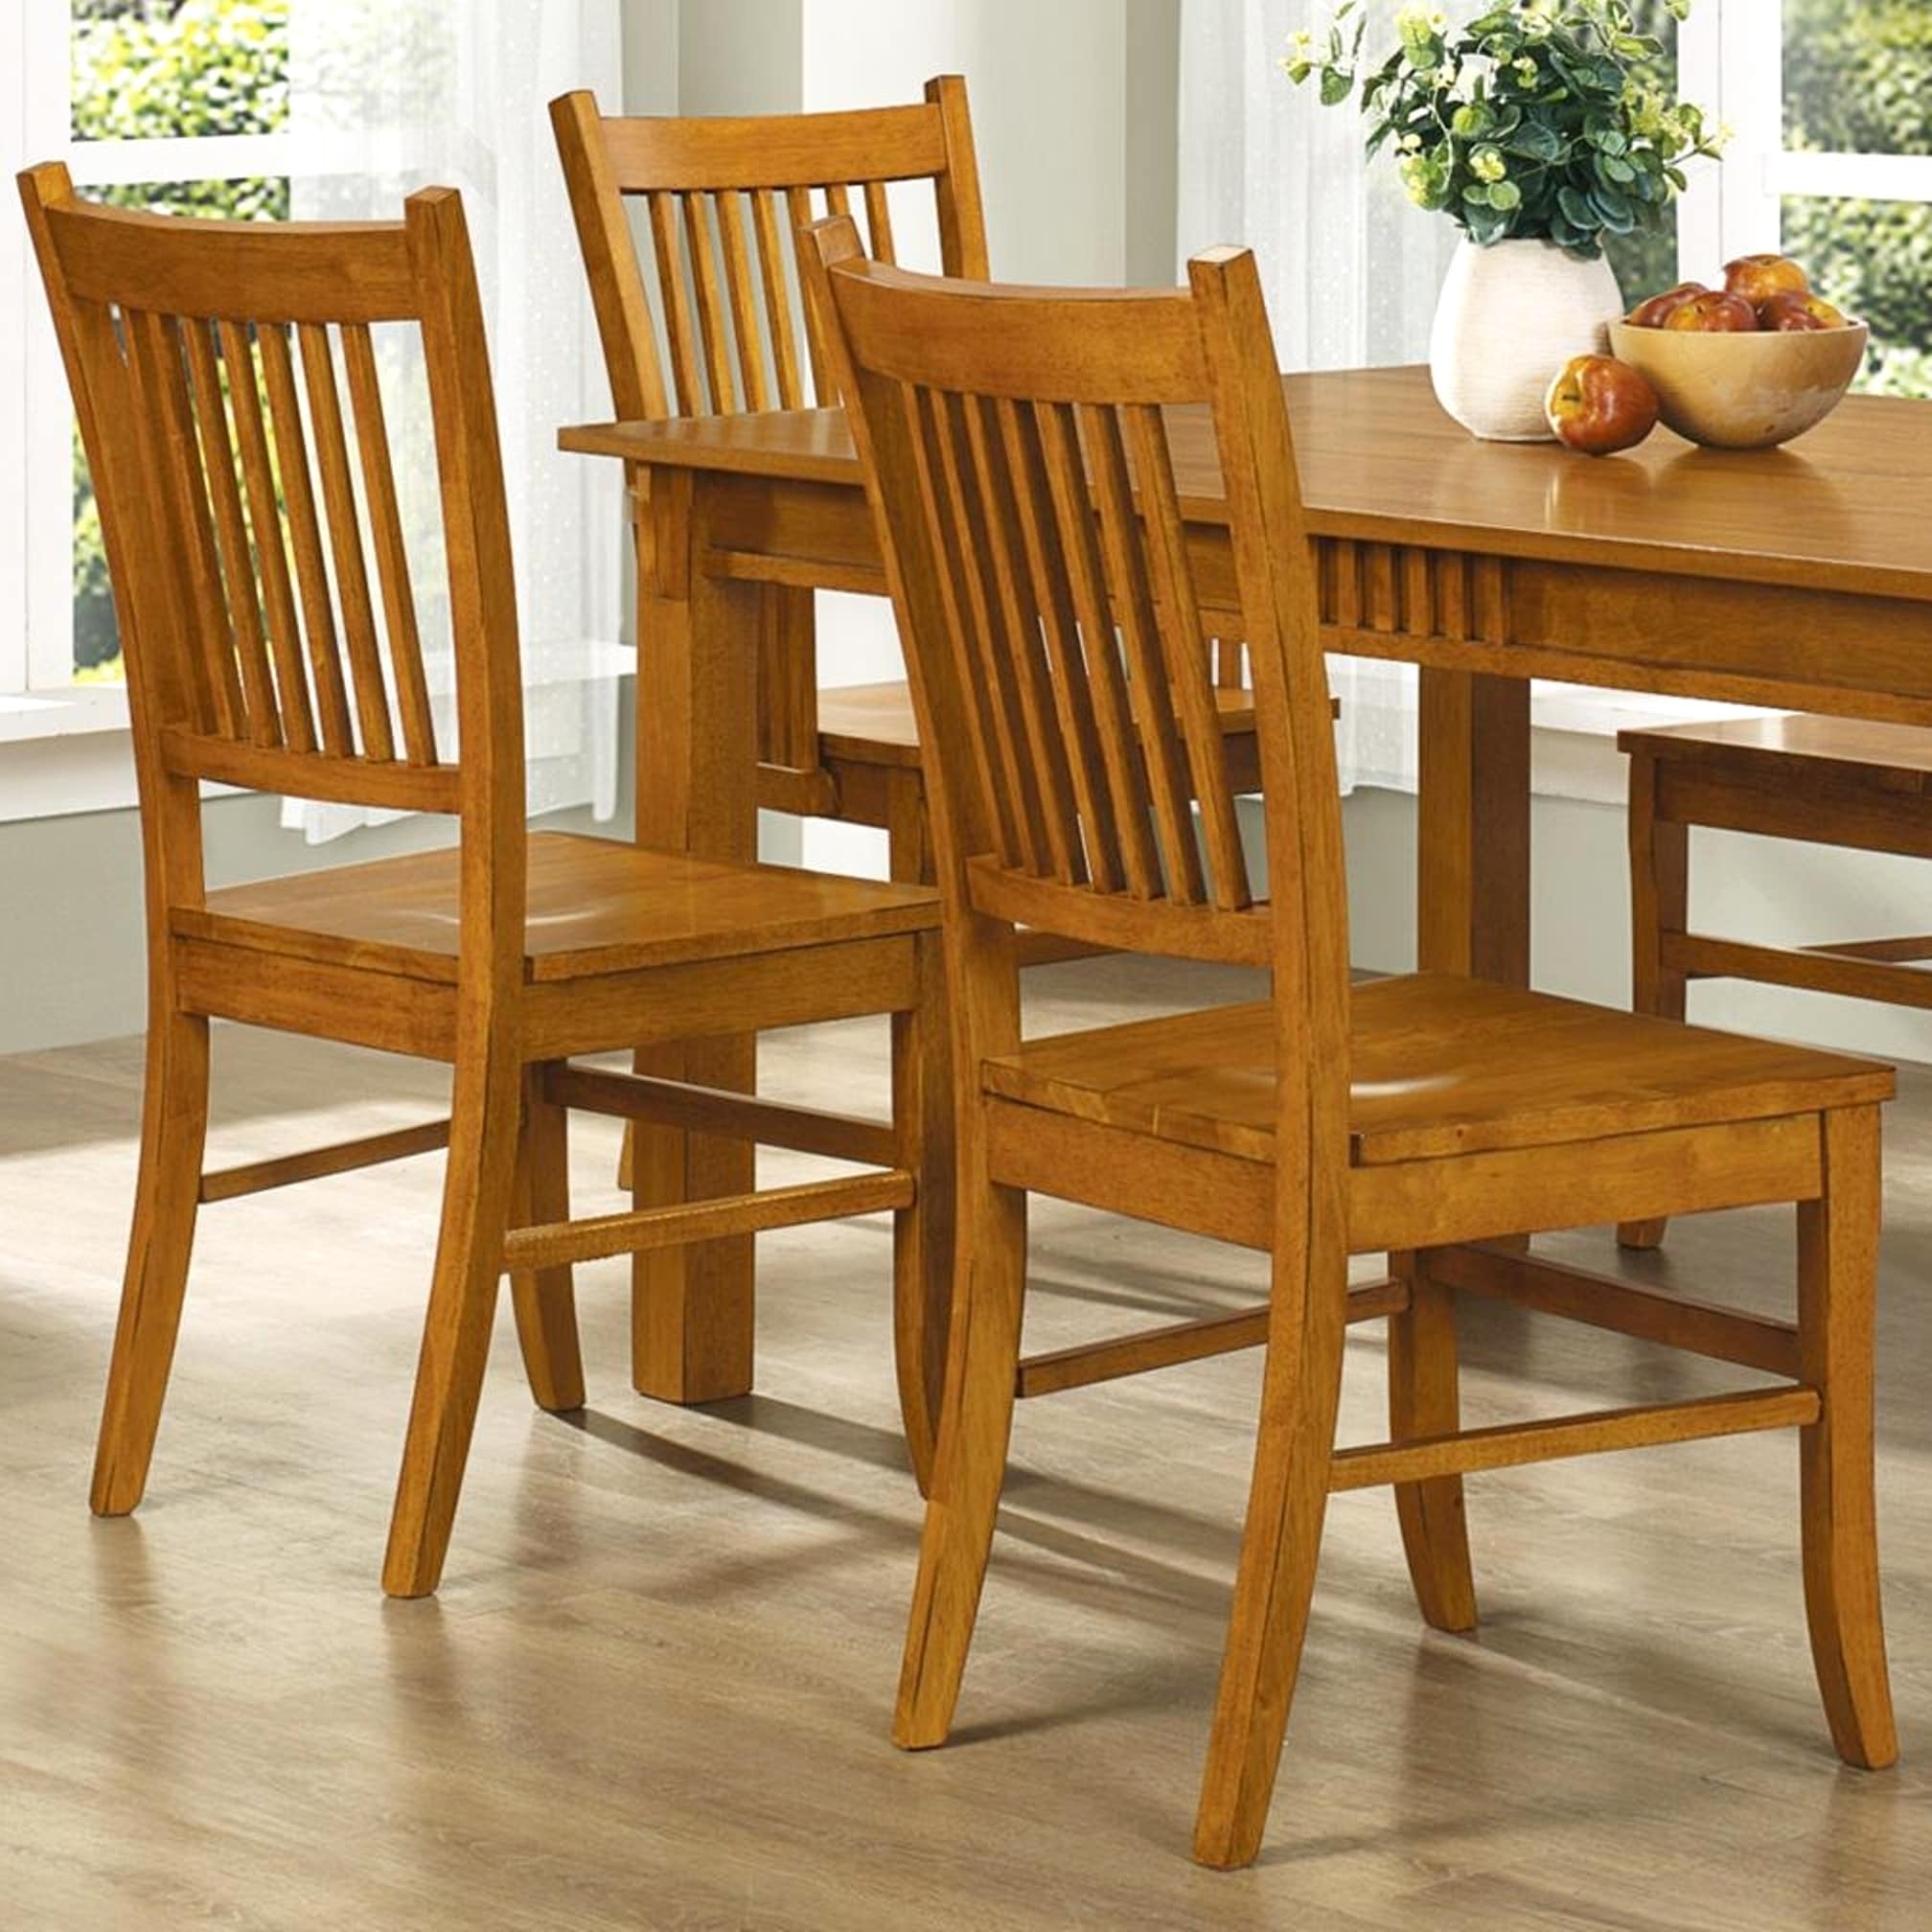 Mission Craftsman Kitchen Dining Room Chairs For Less